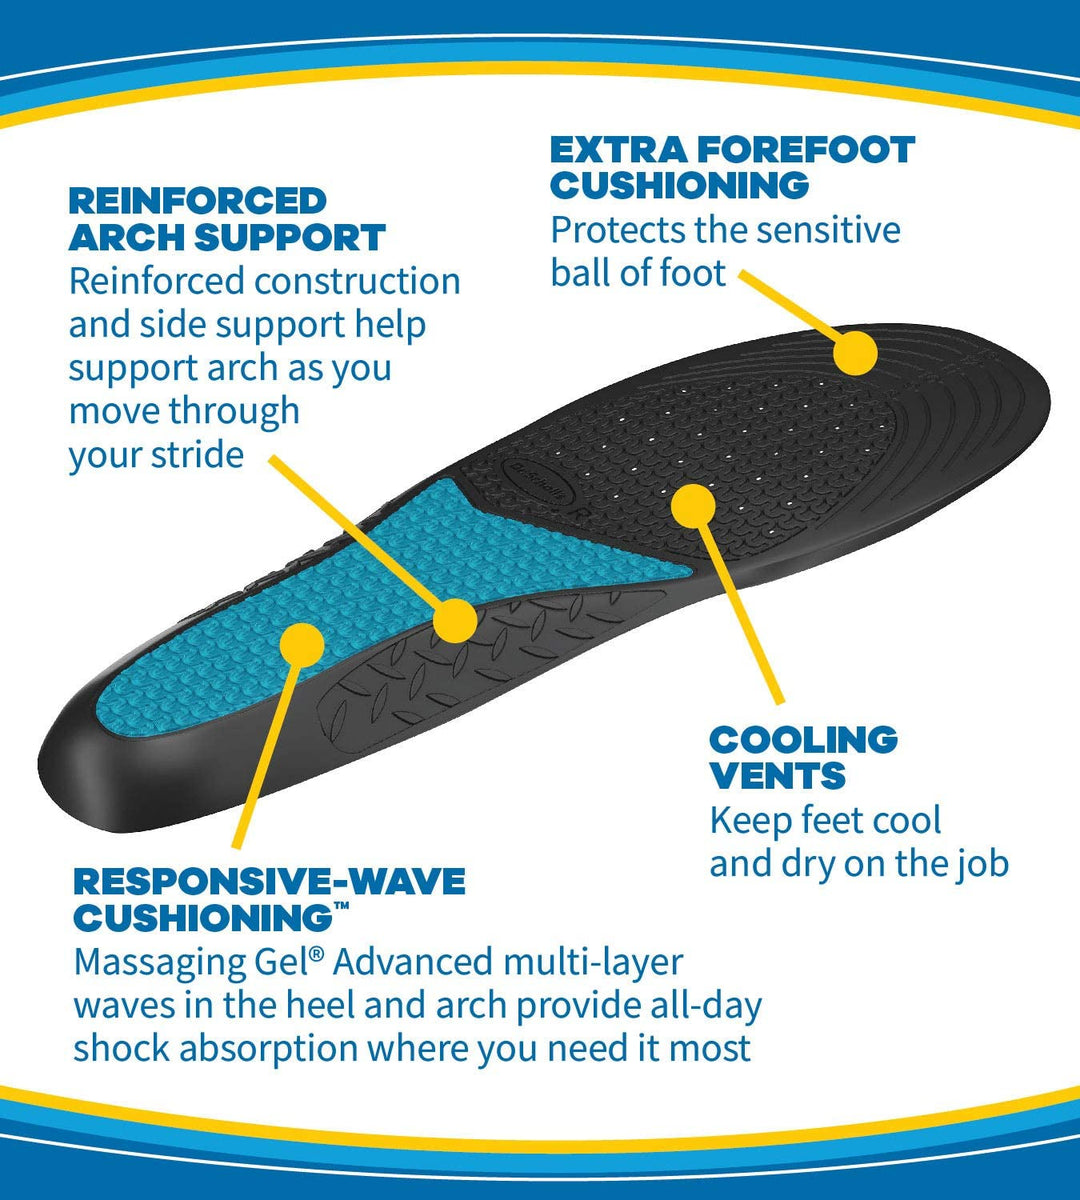 Work All-Day Superior Comfort Insoles (with) Massaging Gel®, Men, 1 Pair, Trim to Fit Men 8 - 14 - 3alababak